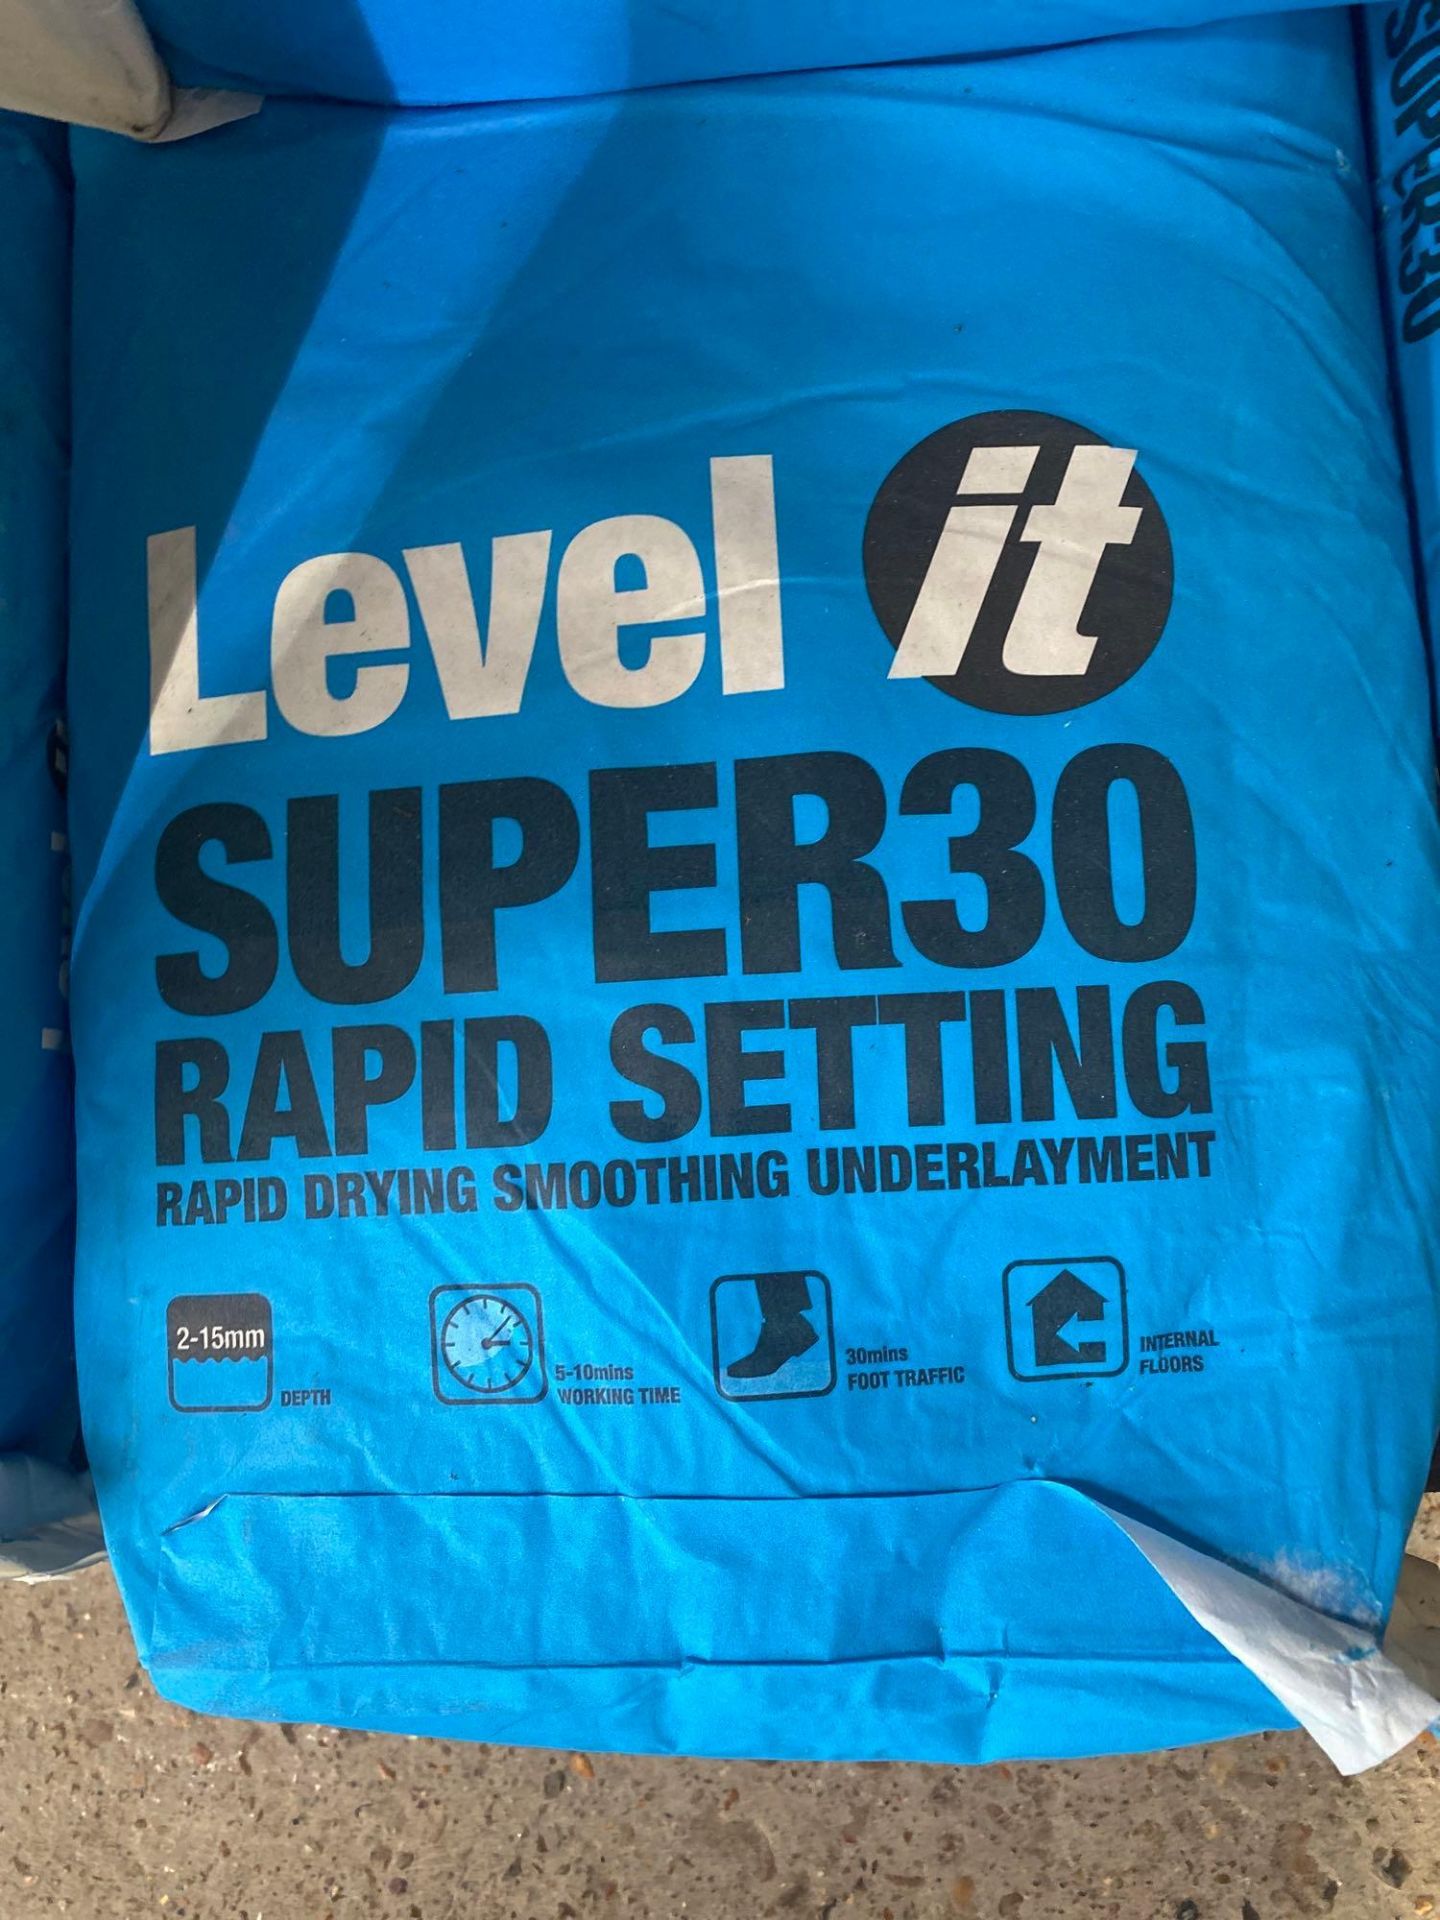 7 bags of Level it super 30 rapid setting levelling compound complete with seven bottles of setting - Image 2 of 3